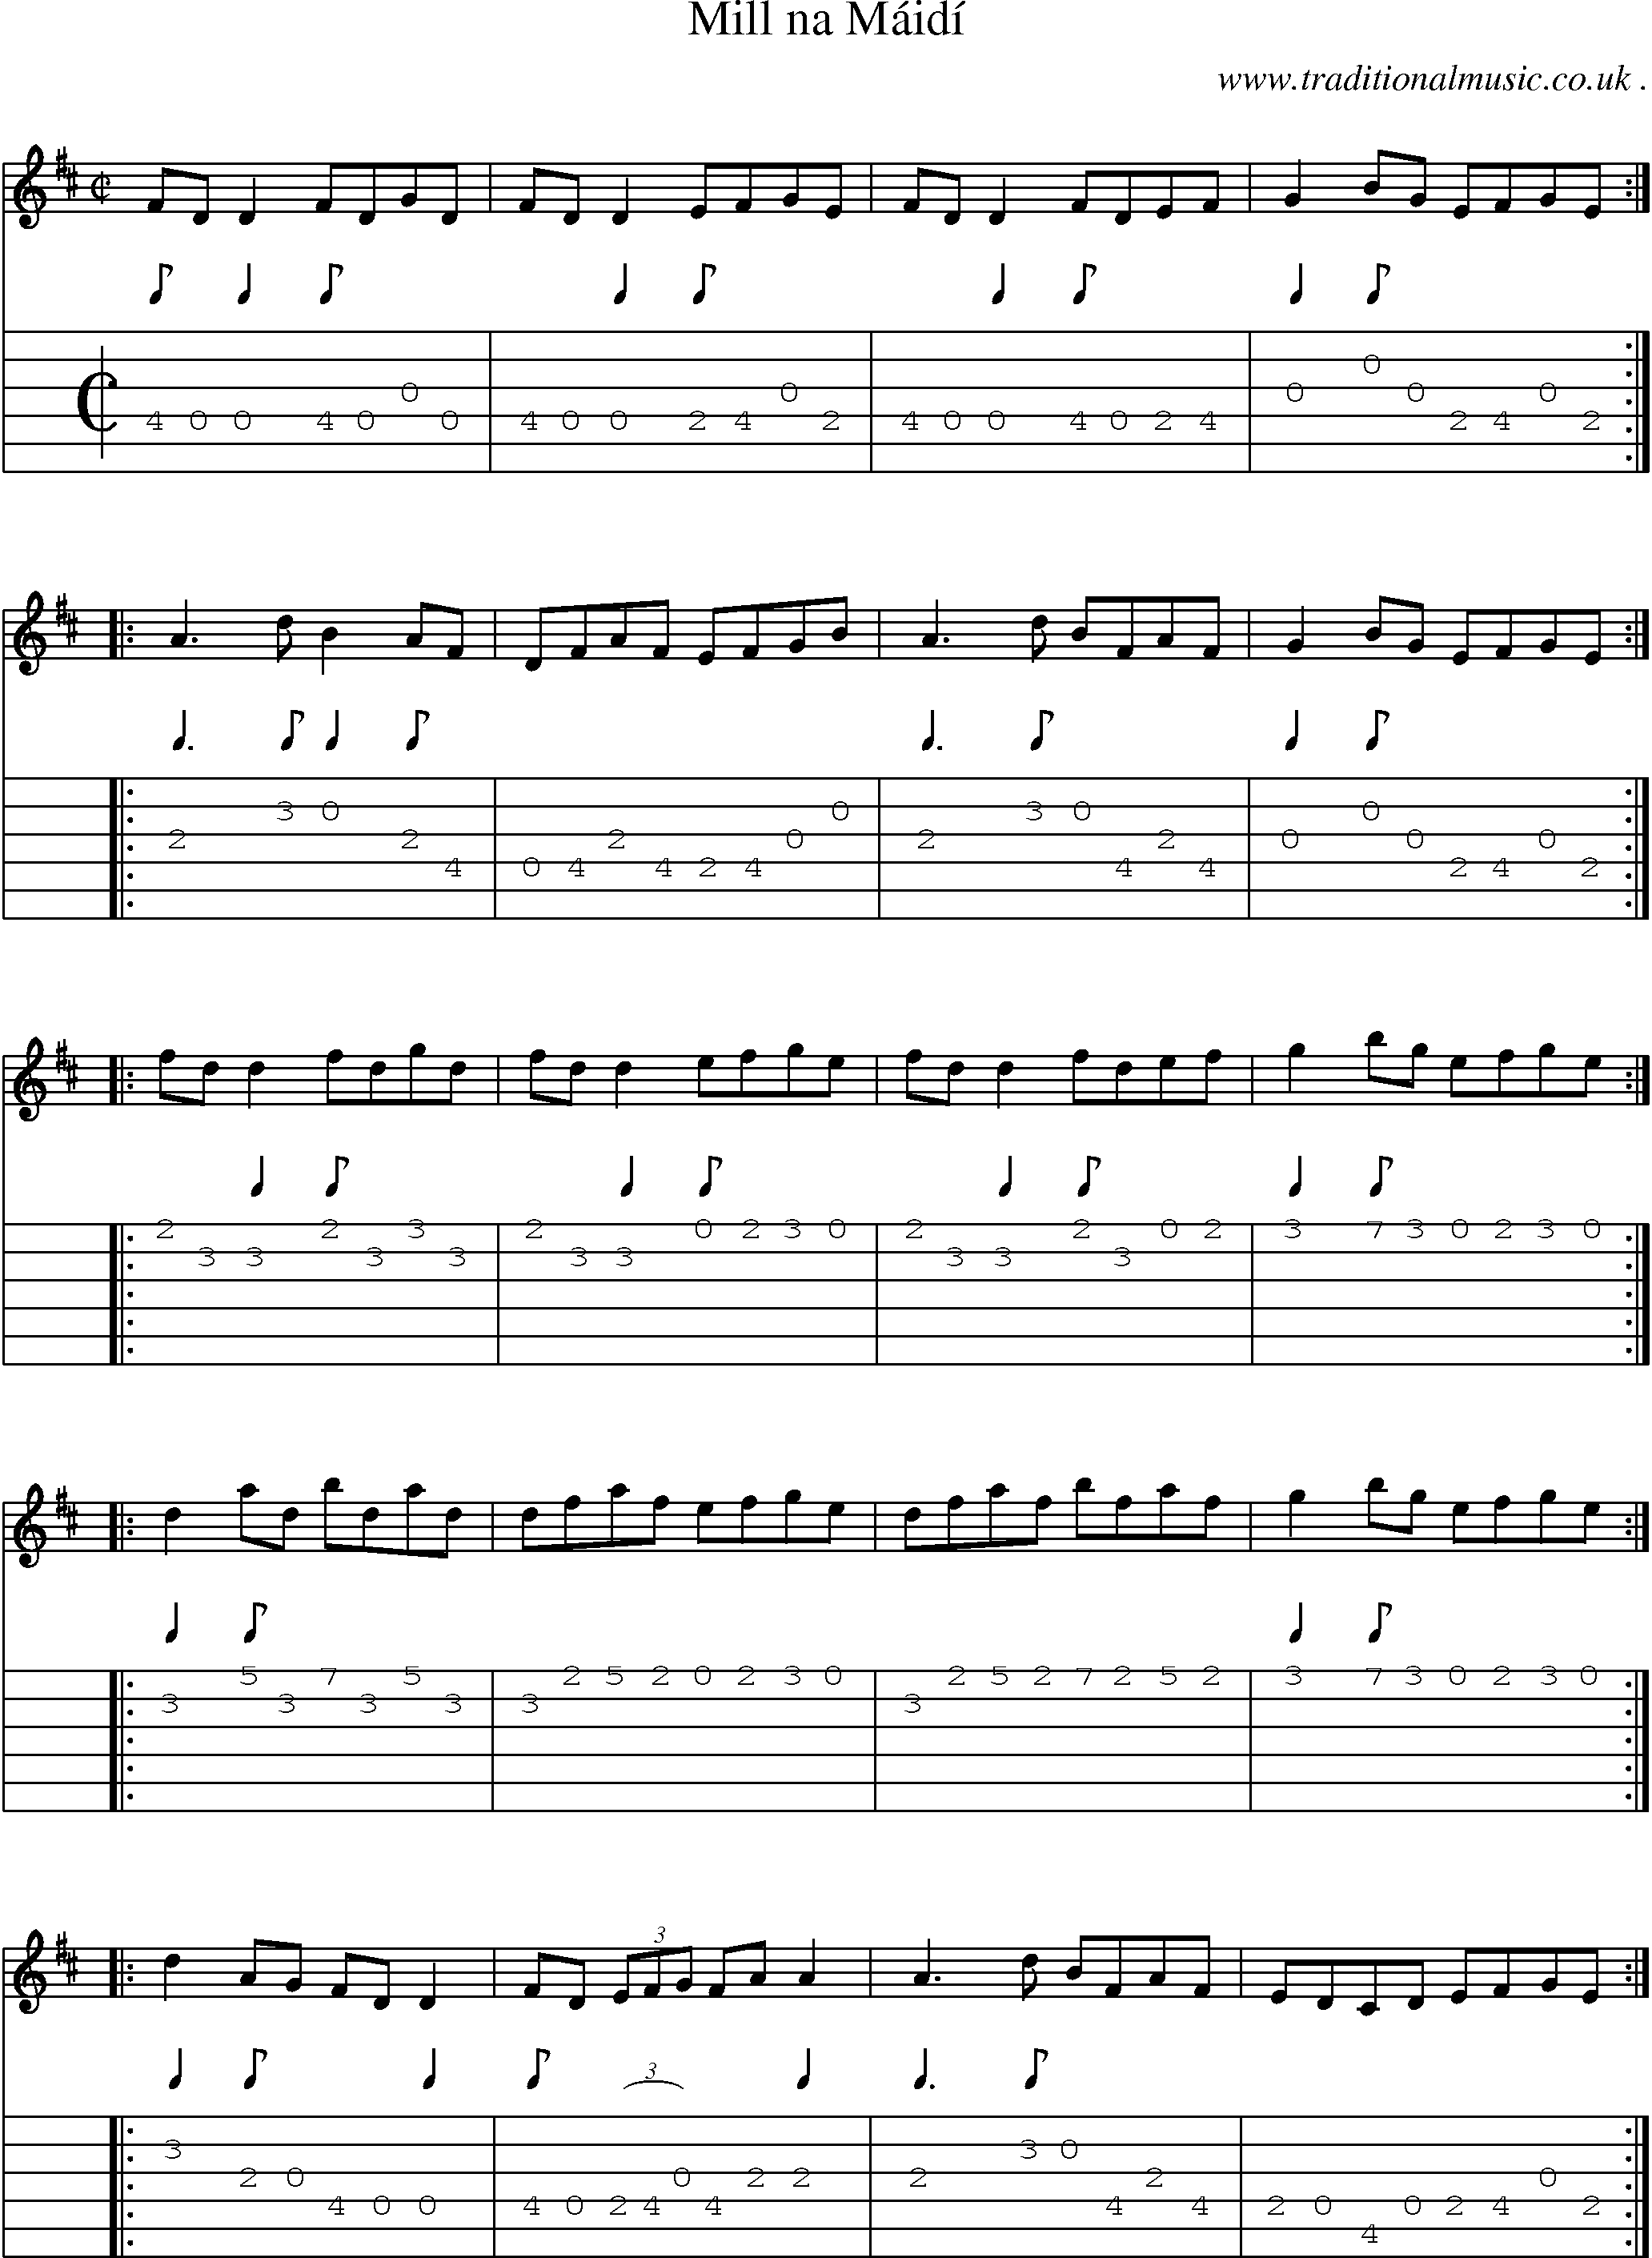 Sheet-Music and Guitar Tabs for Mill Na Maidi